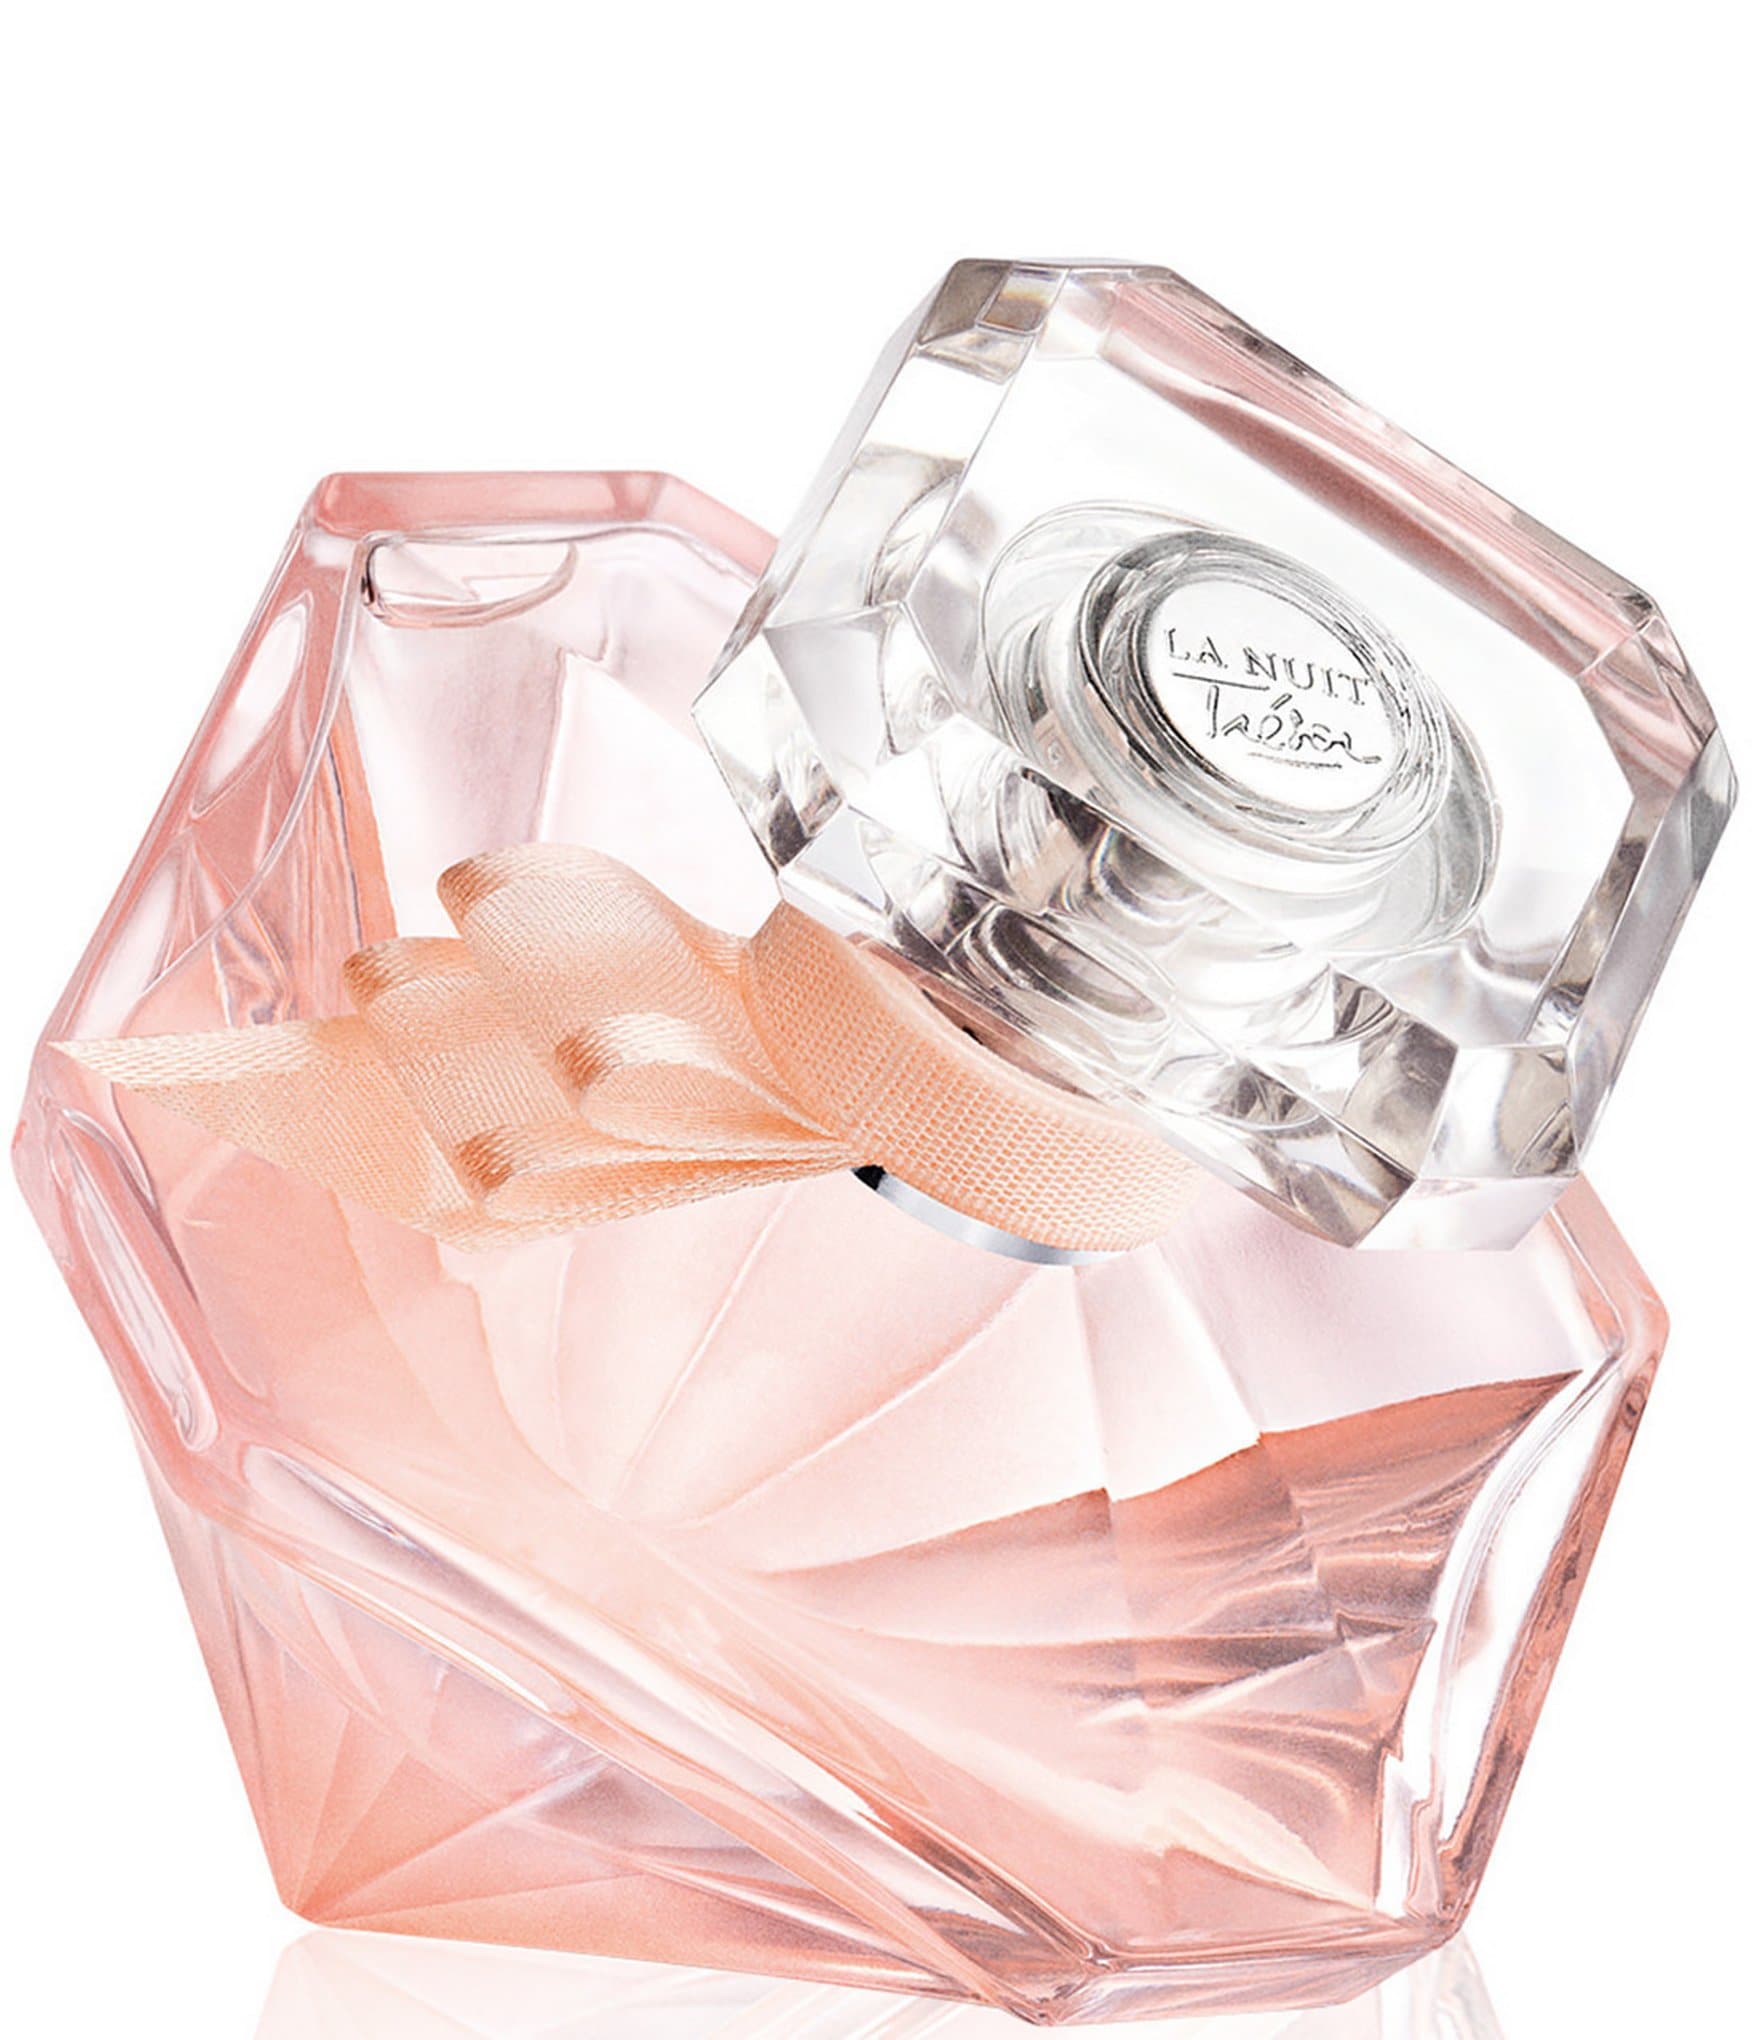 Lancome La Nuit Tresor Nude soft floral perfume guide to scents